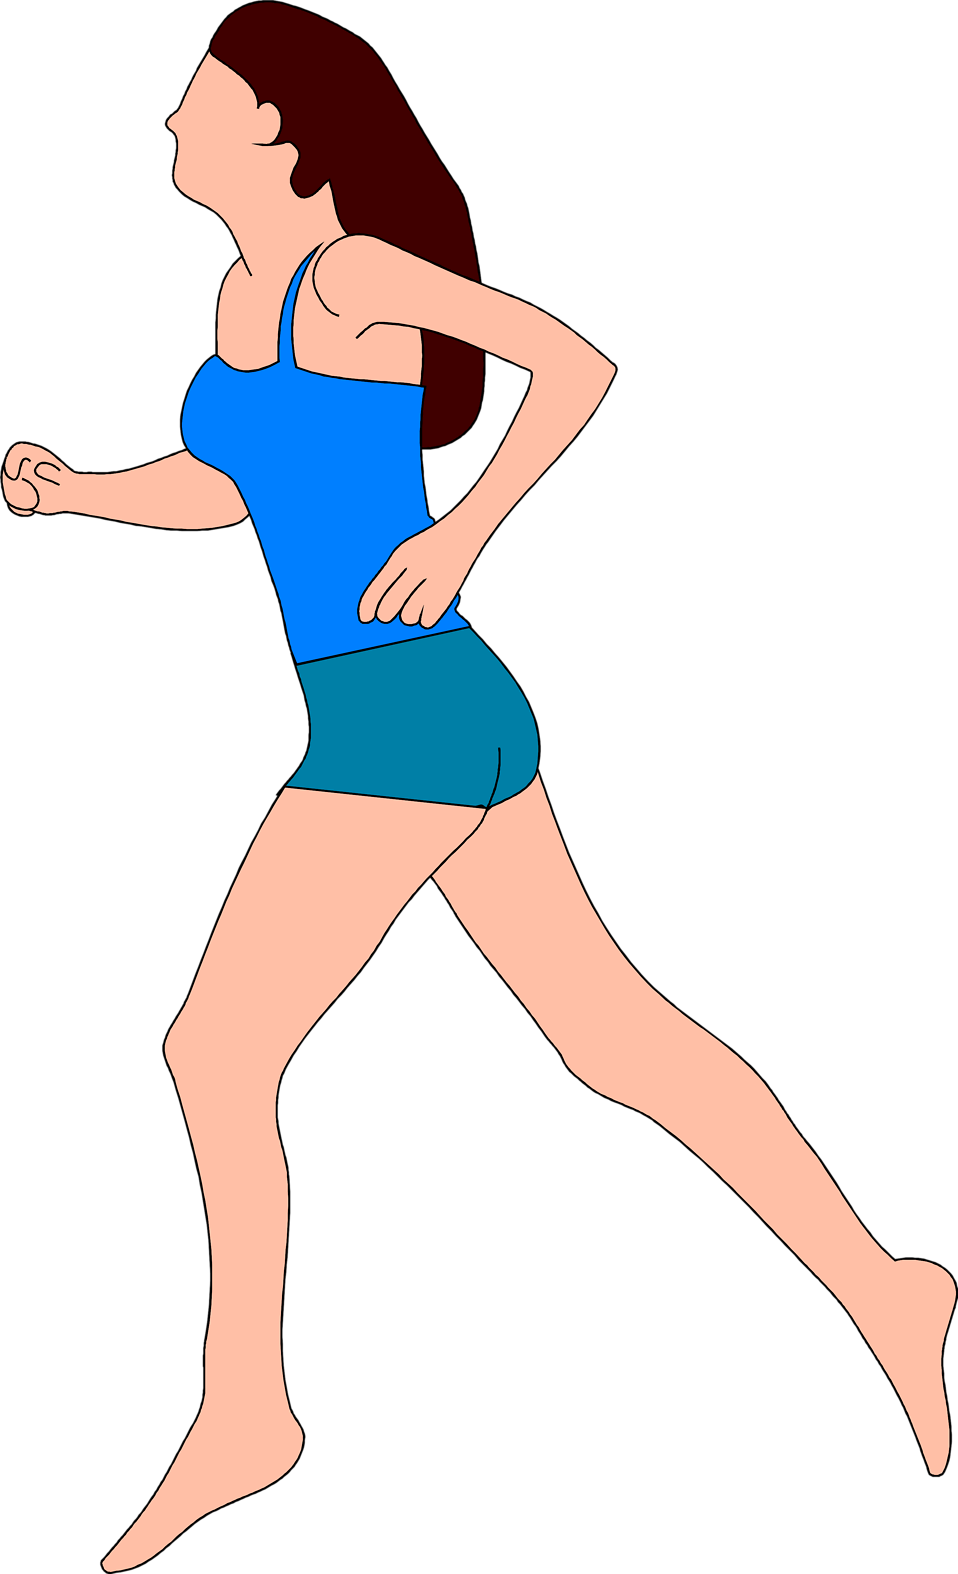 Exercise clipart run. Running woman free stock